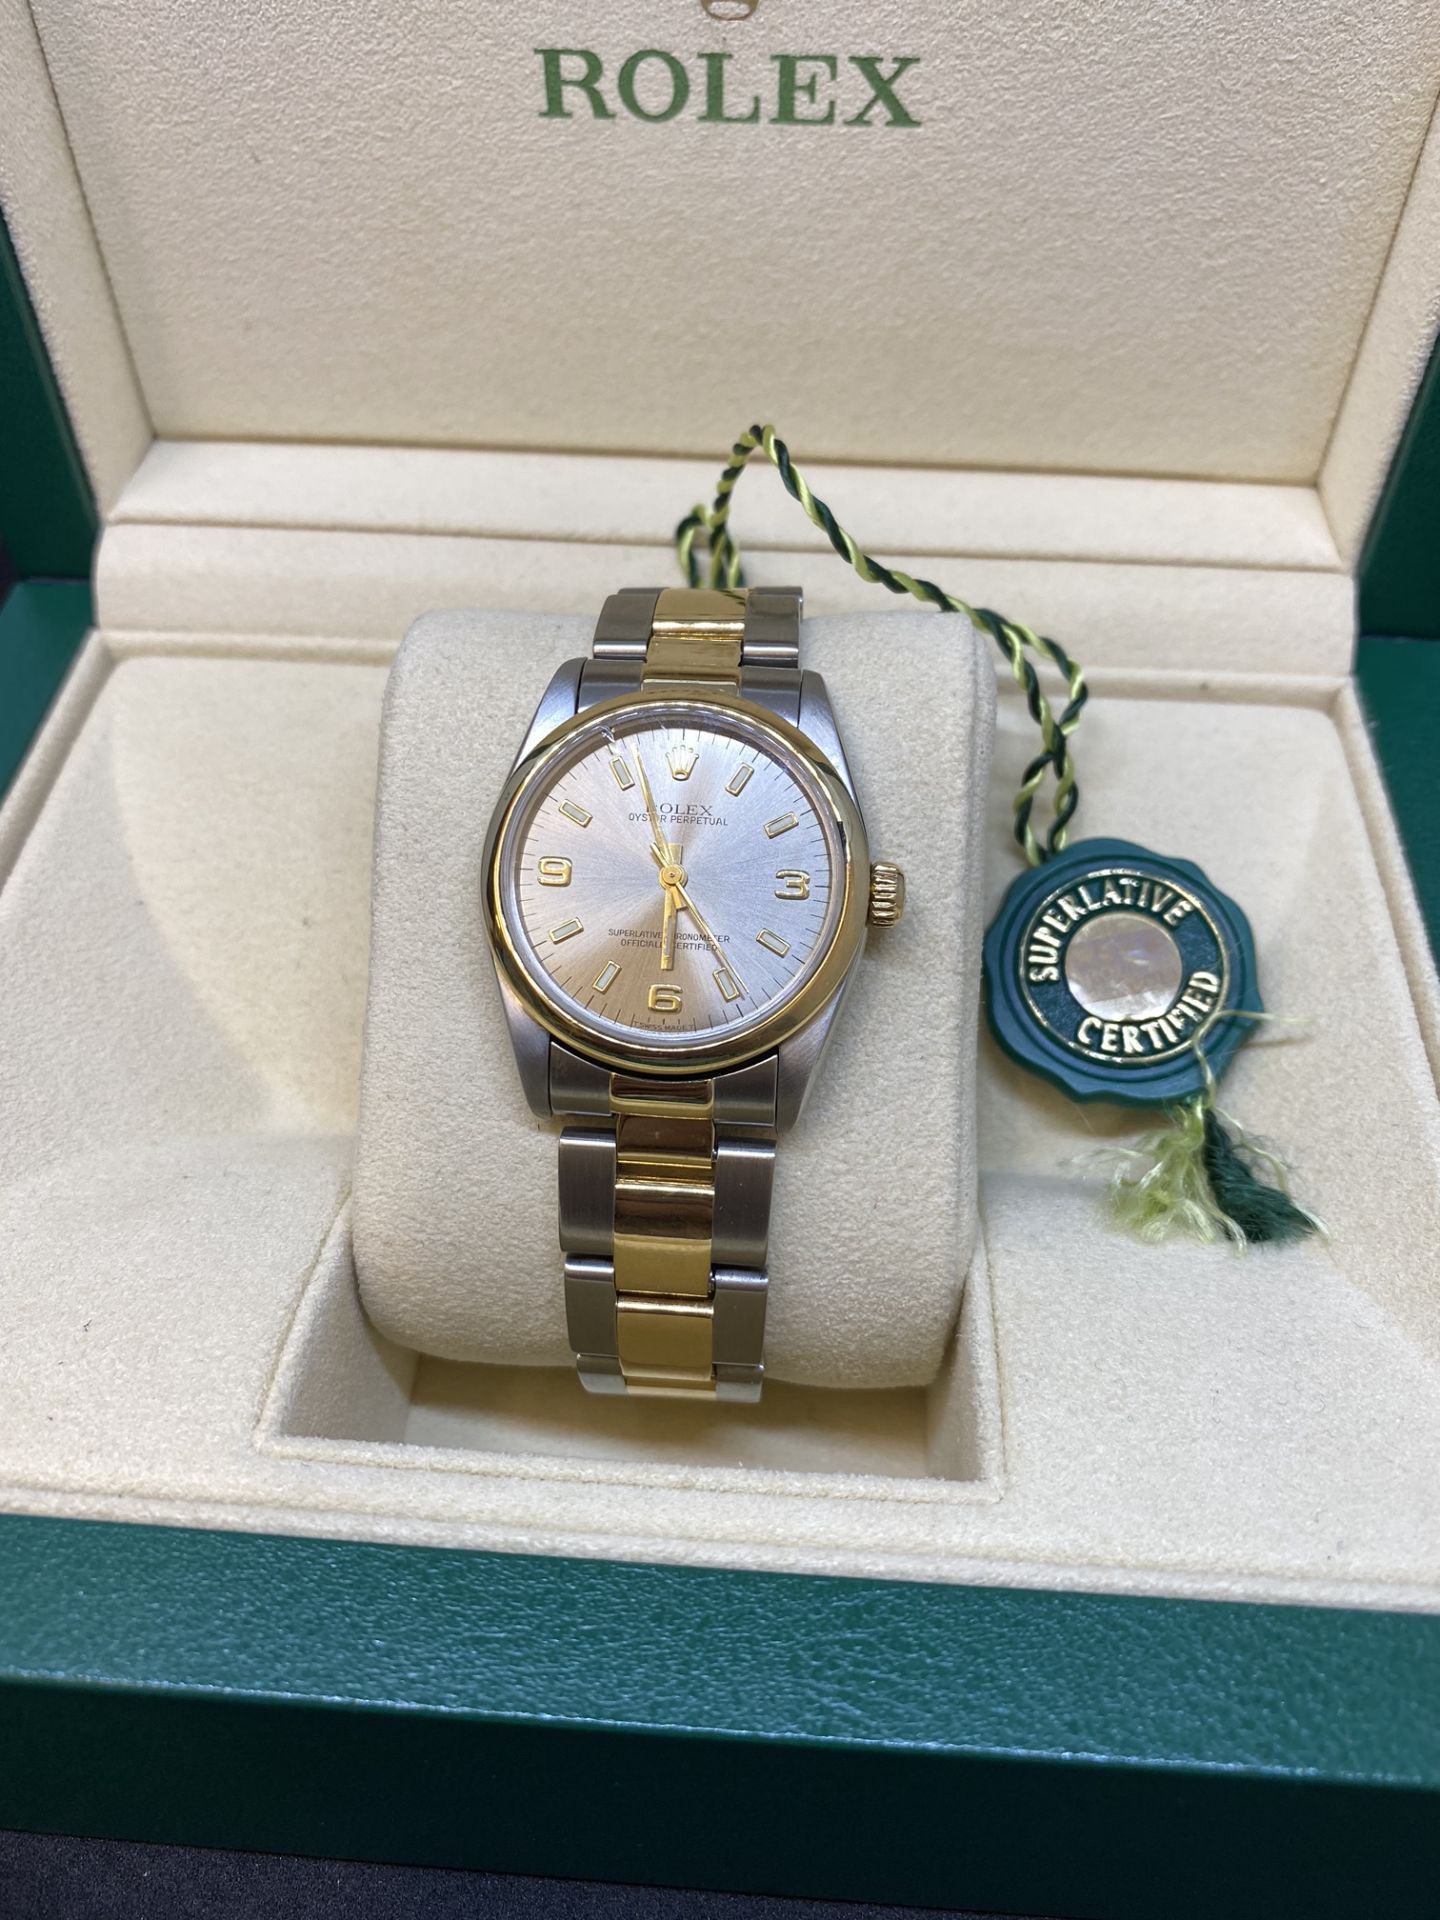 Rolex Steel & Gold Midsize Watch with Box